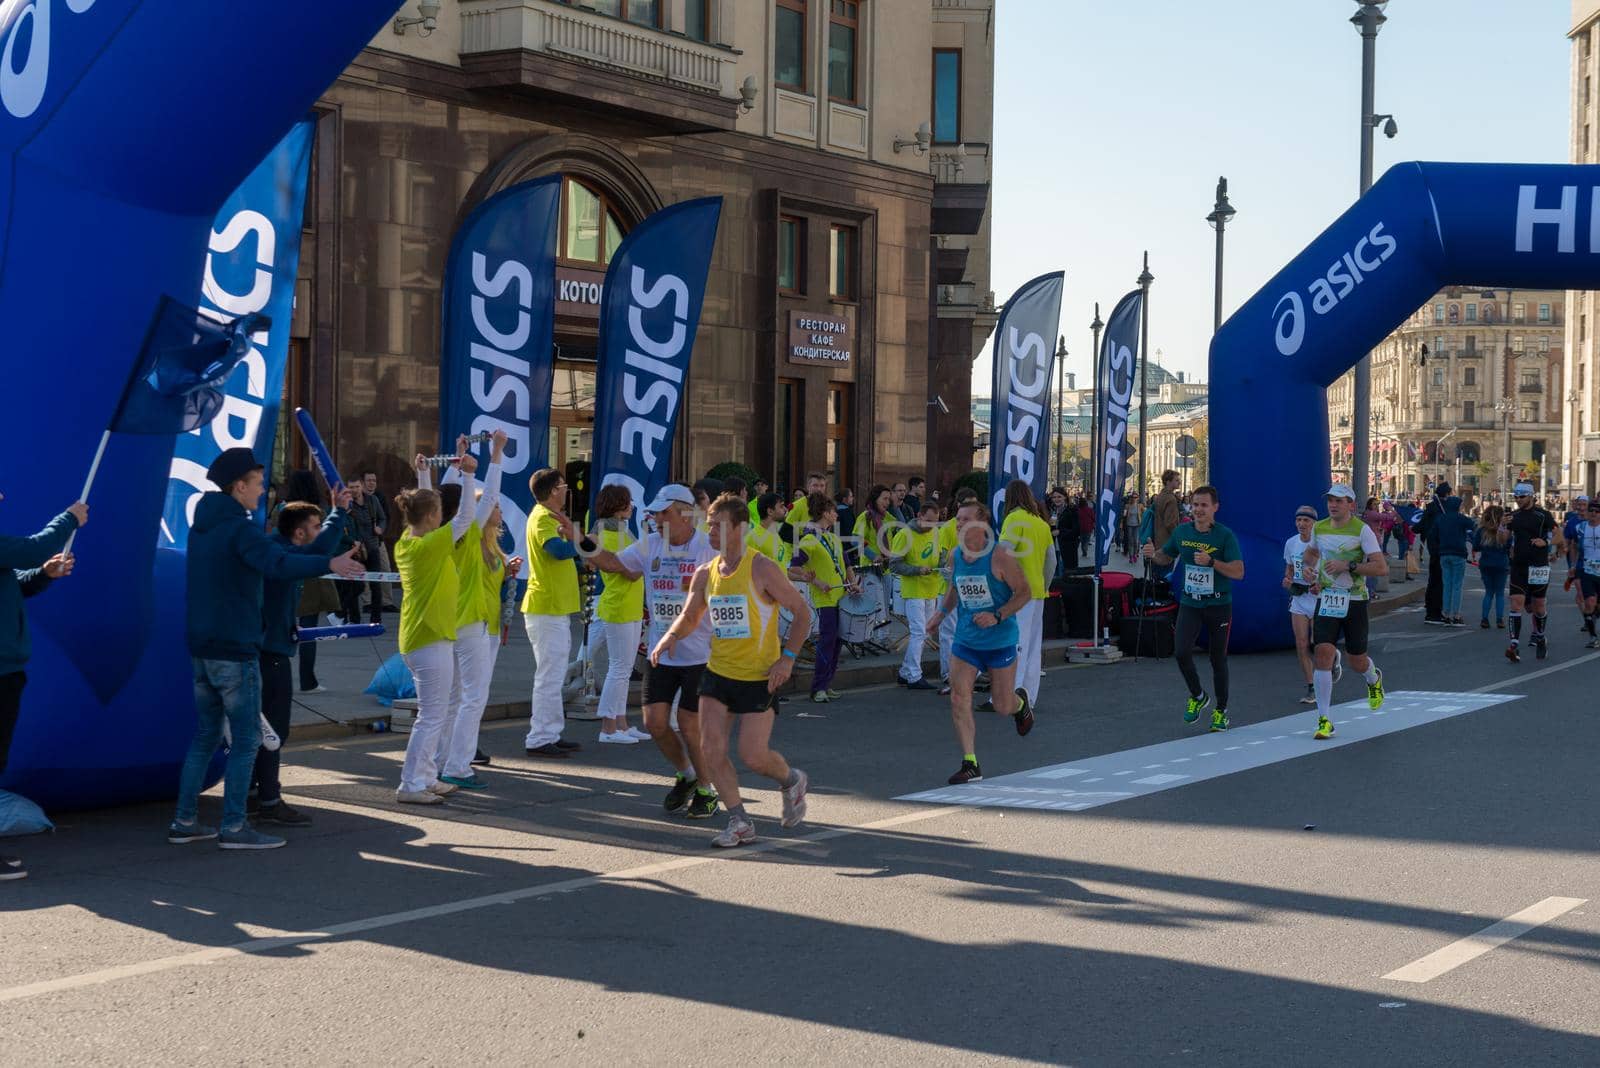 Moscow - September 24, 2017: Participants of Moscow autumn marathon sponsored by Asics brand